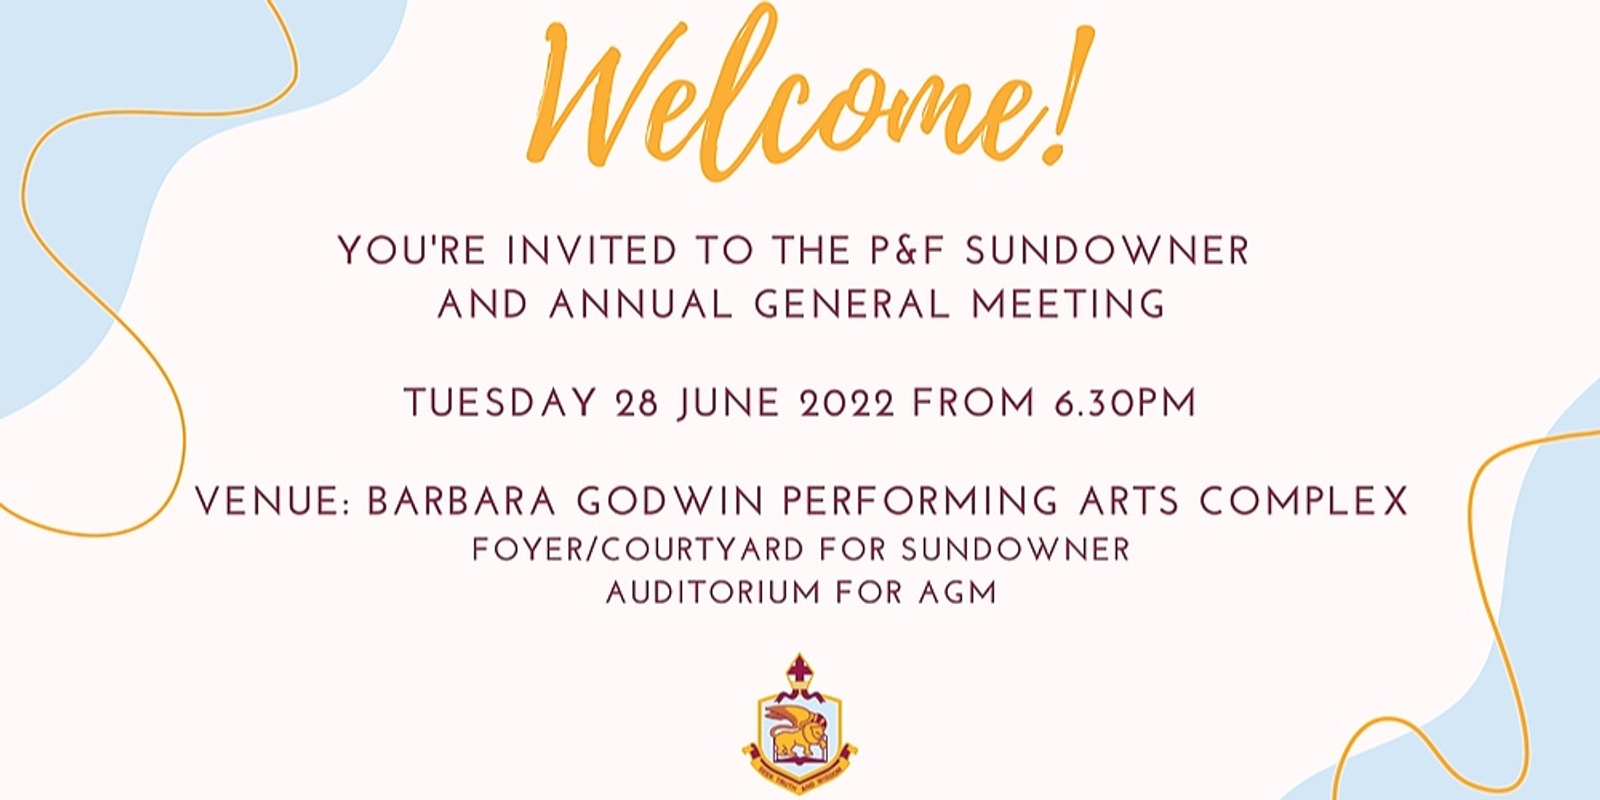 Banner image for 2022 P&F Sundowner and Annual General Meeting